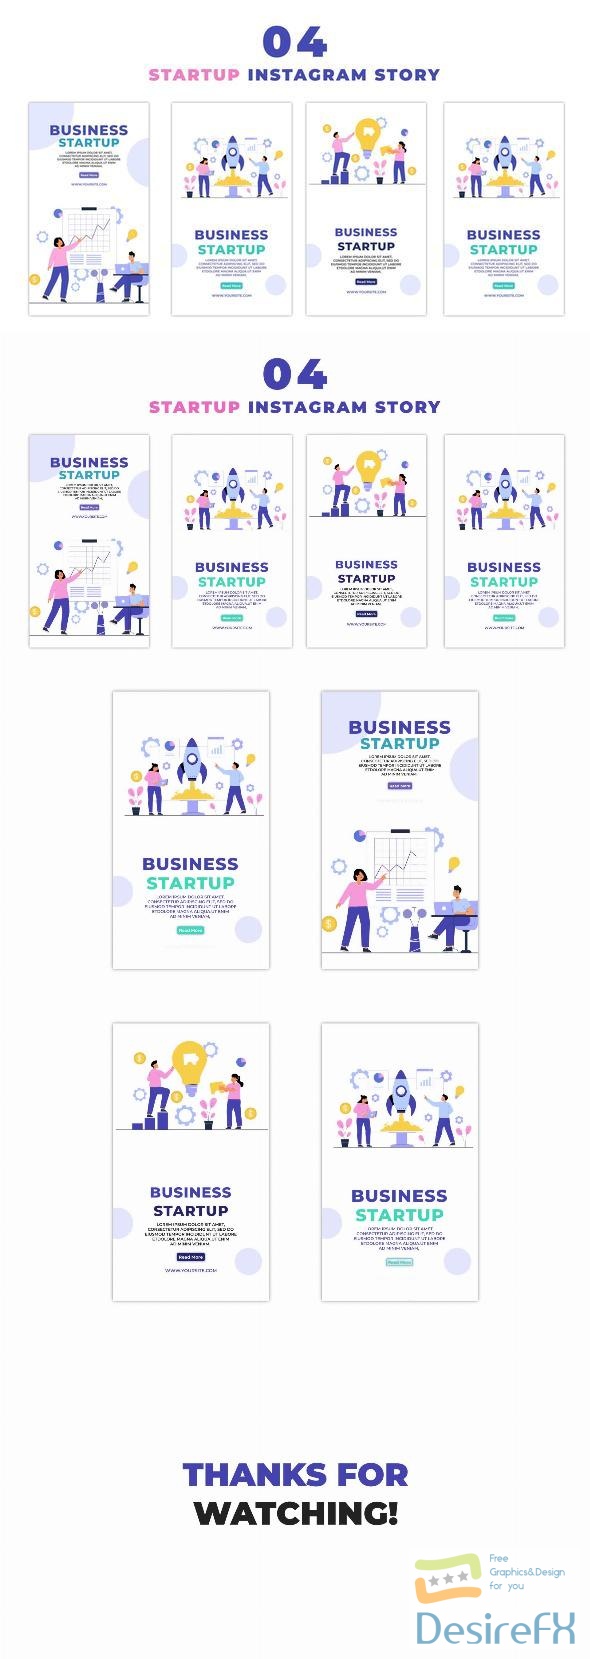 VideoHive Eye Catching Business Startup Flat Character Instagram Story 47440940